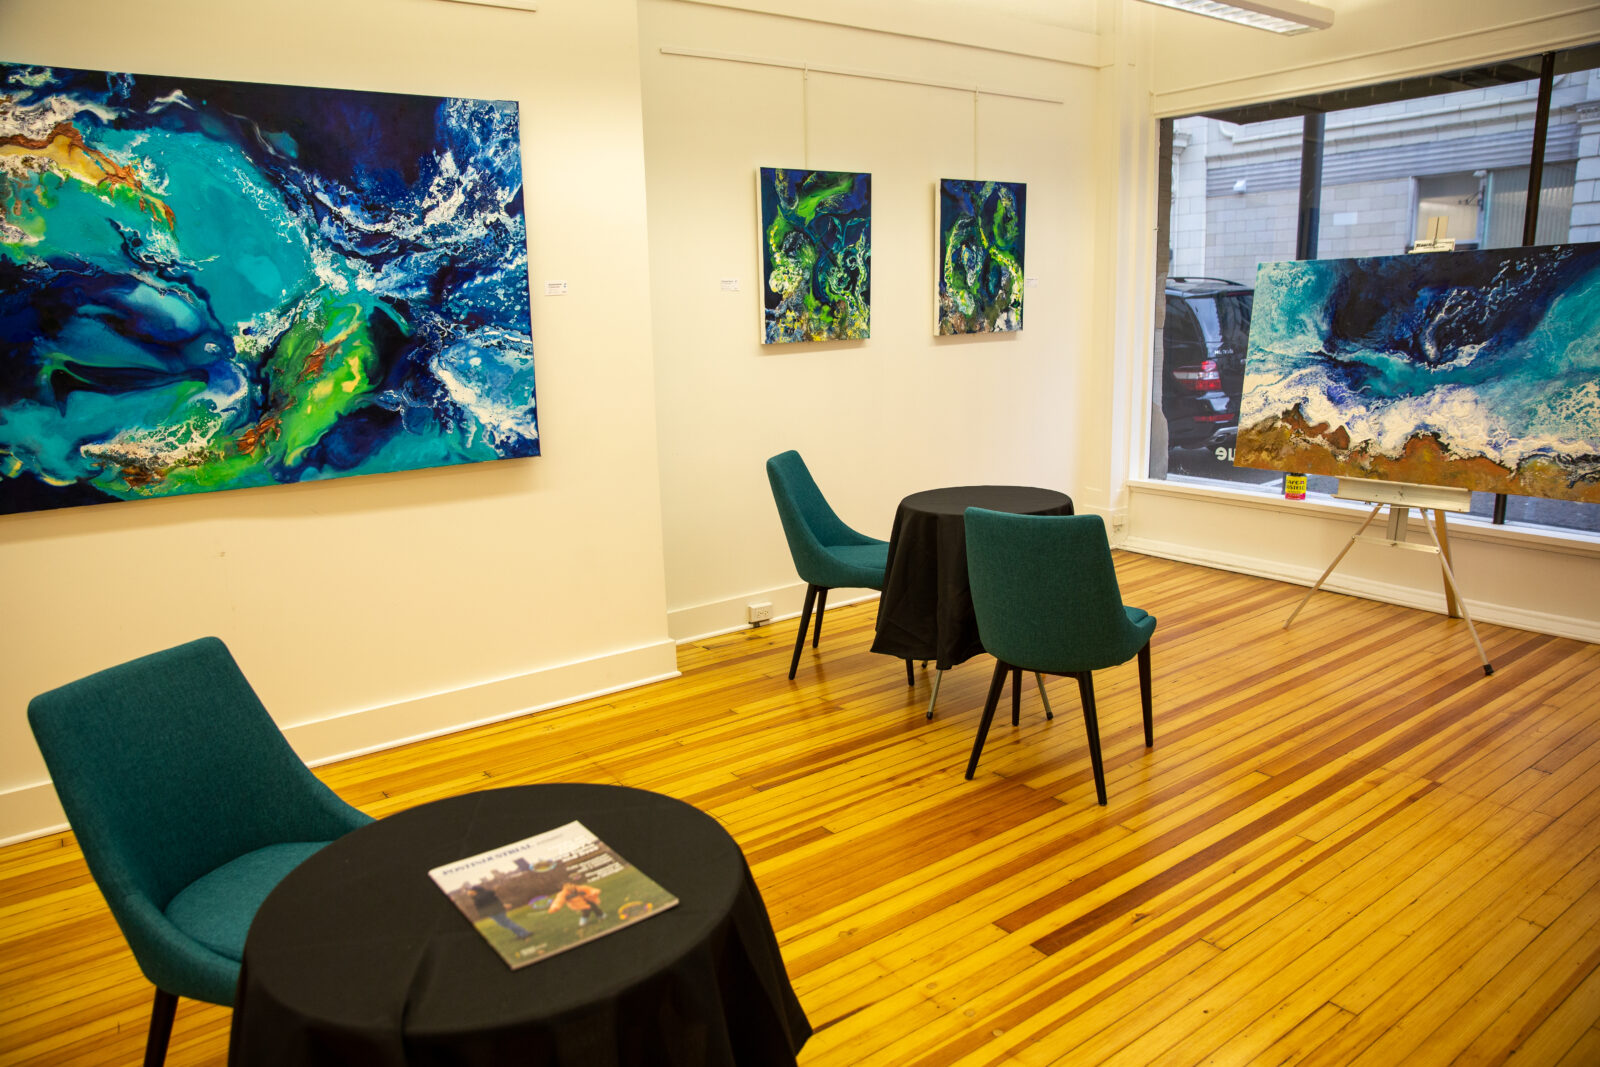 Atithi Studios in Sharpsburg, Pennsylvania. Located on Canal Street, it is an events space and hub for artists and art exhibitions.